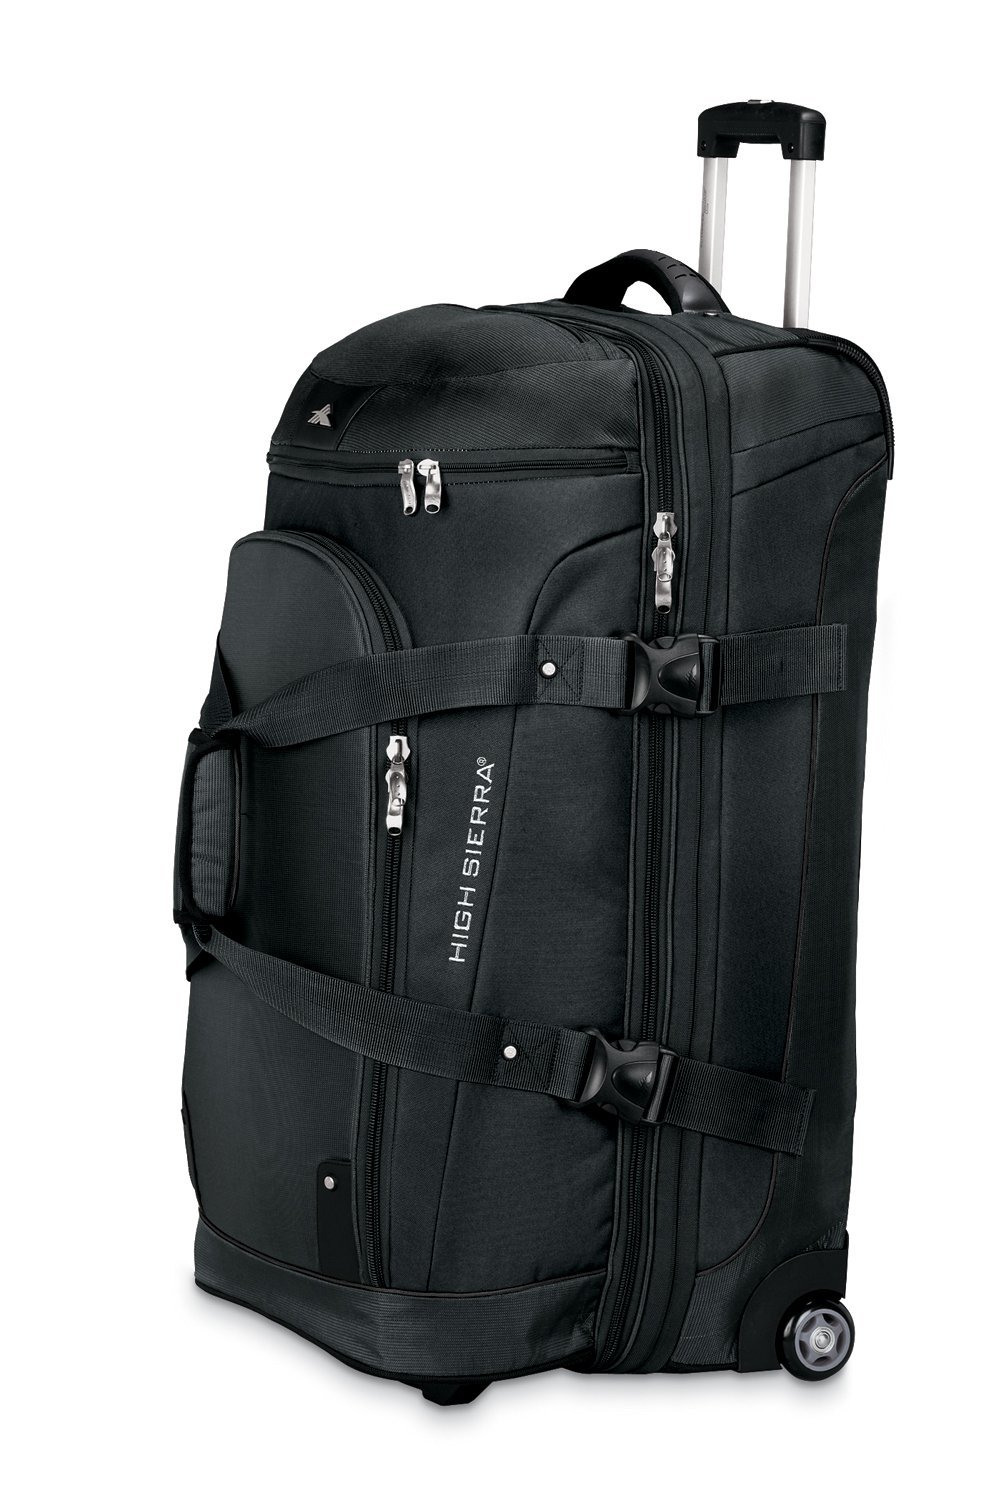 5 Best Rolling Duffel Bag - Make your travel much more effortless - Tool Box